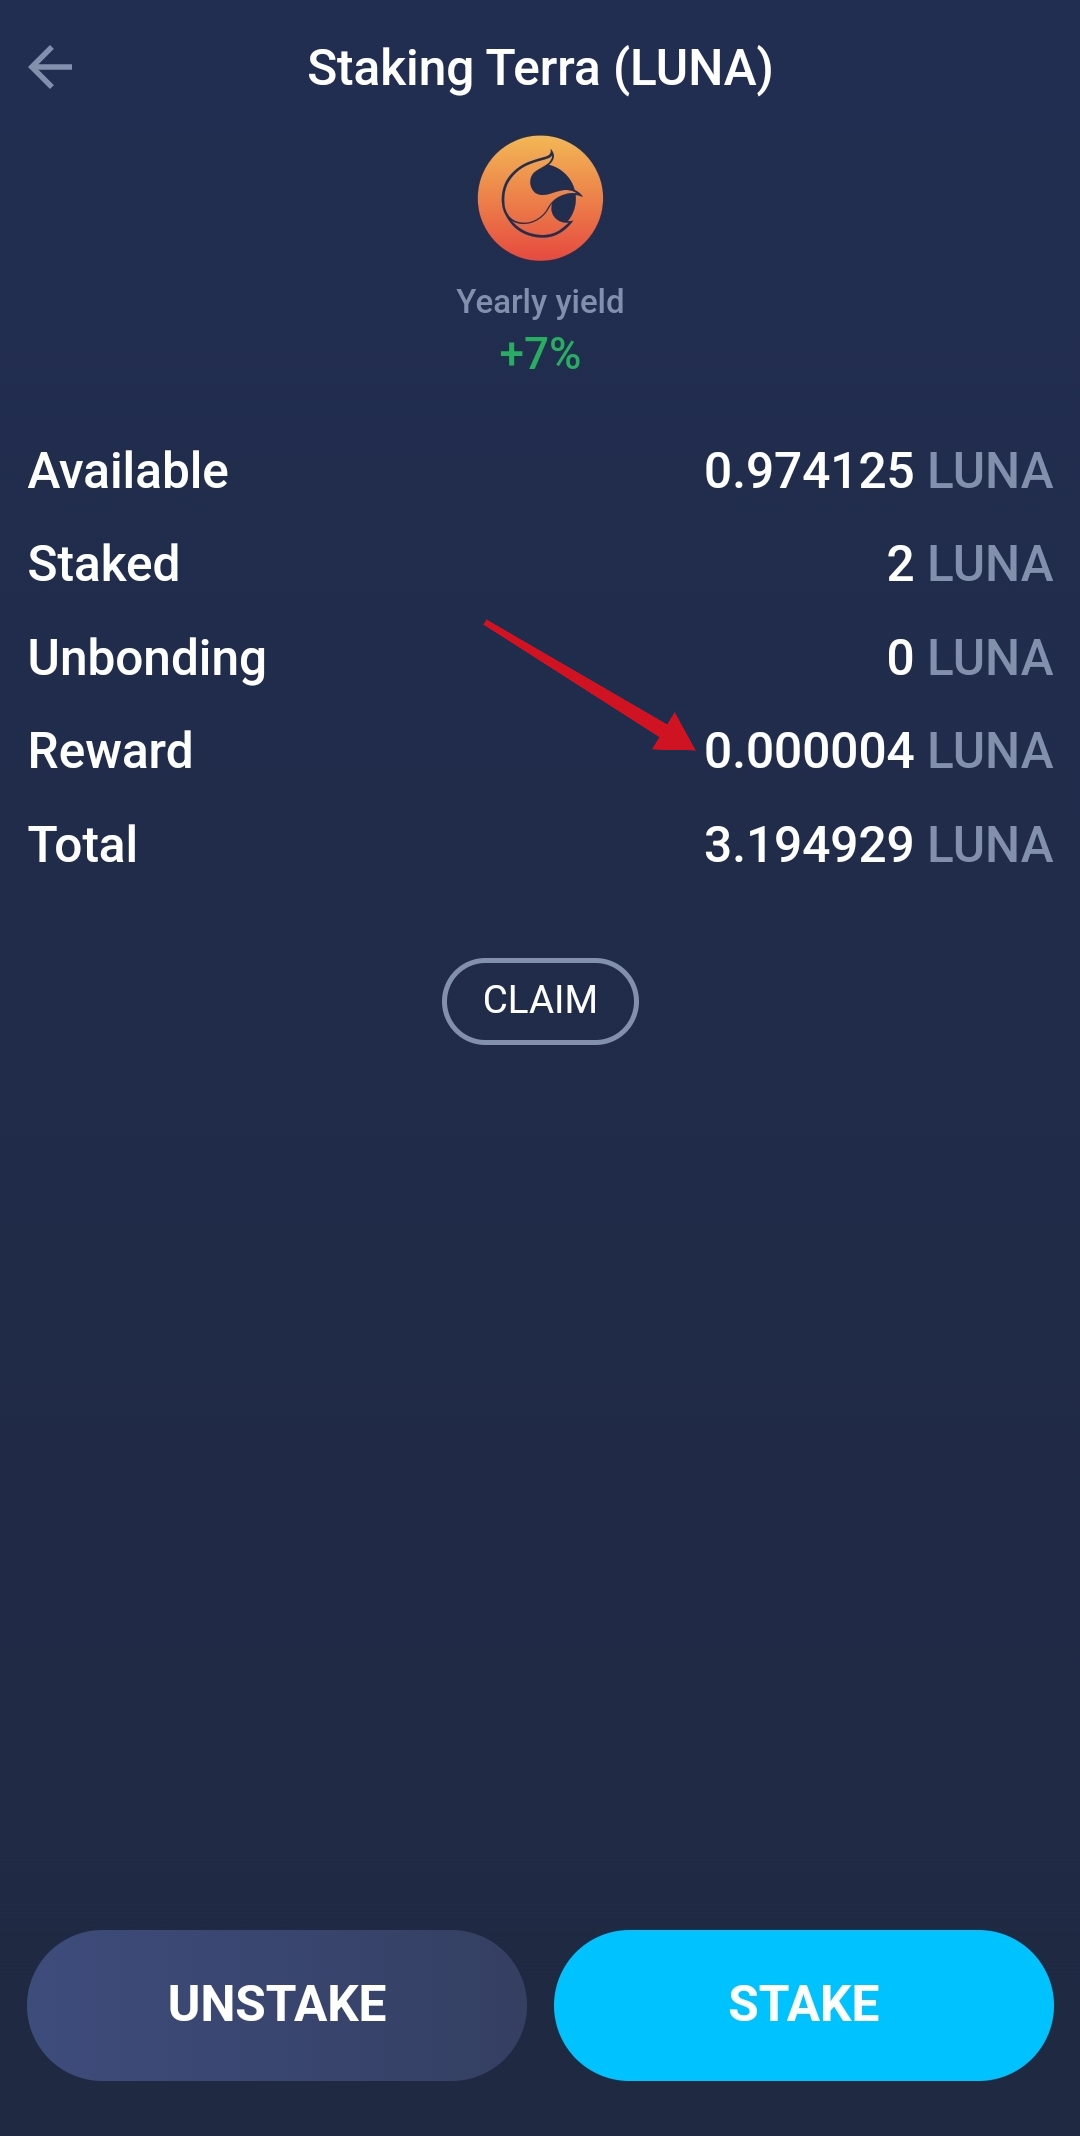 EXPLAINER GUIDE: How to Stake $LUNA and Earn Rewards on the Terra Ecosystem in 5 Easy Steps – BitKE